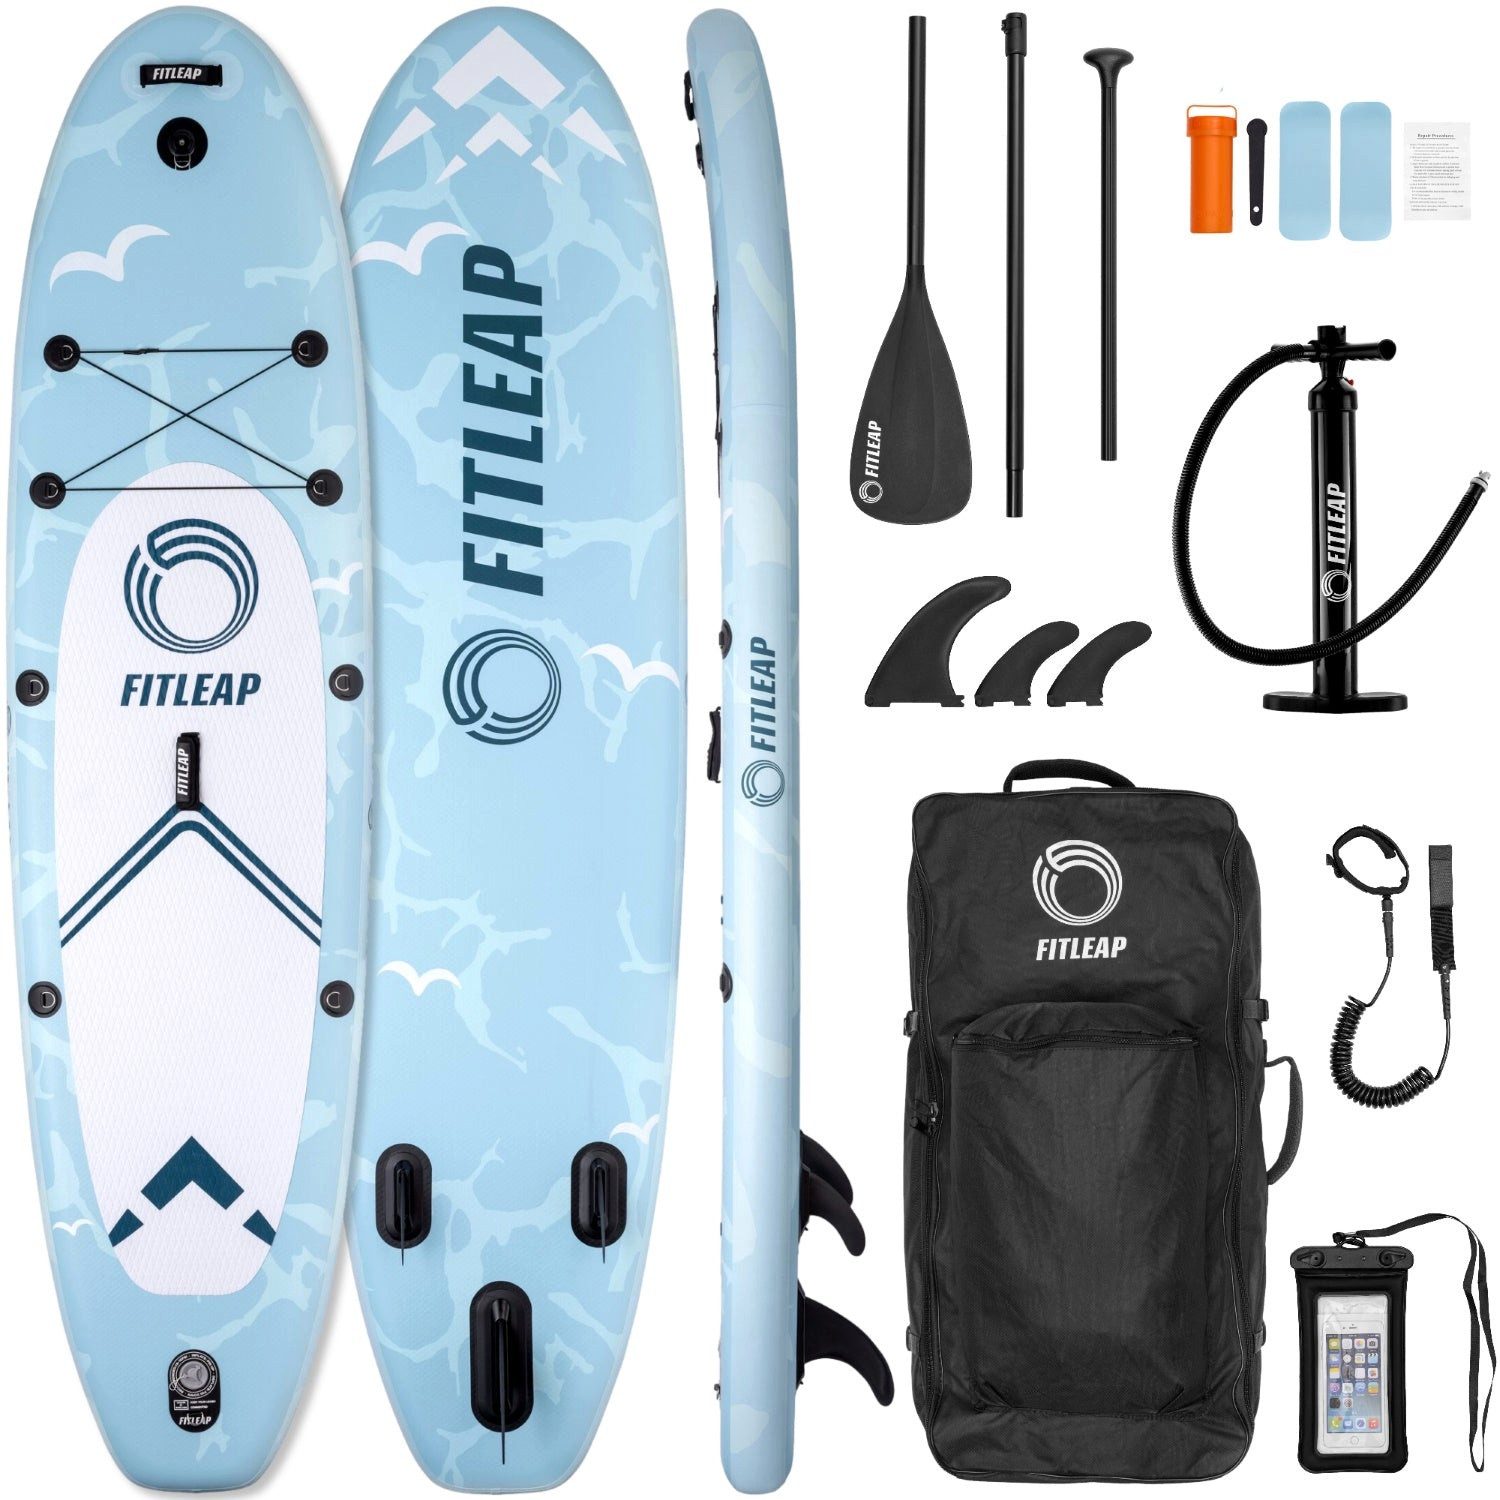 Fitleap Inflatable SUP-Board Fitleap Premium Stand Up Paddle Board aufblasbar - SUP Board Set mit …